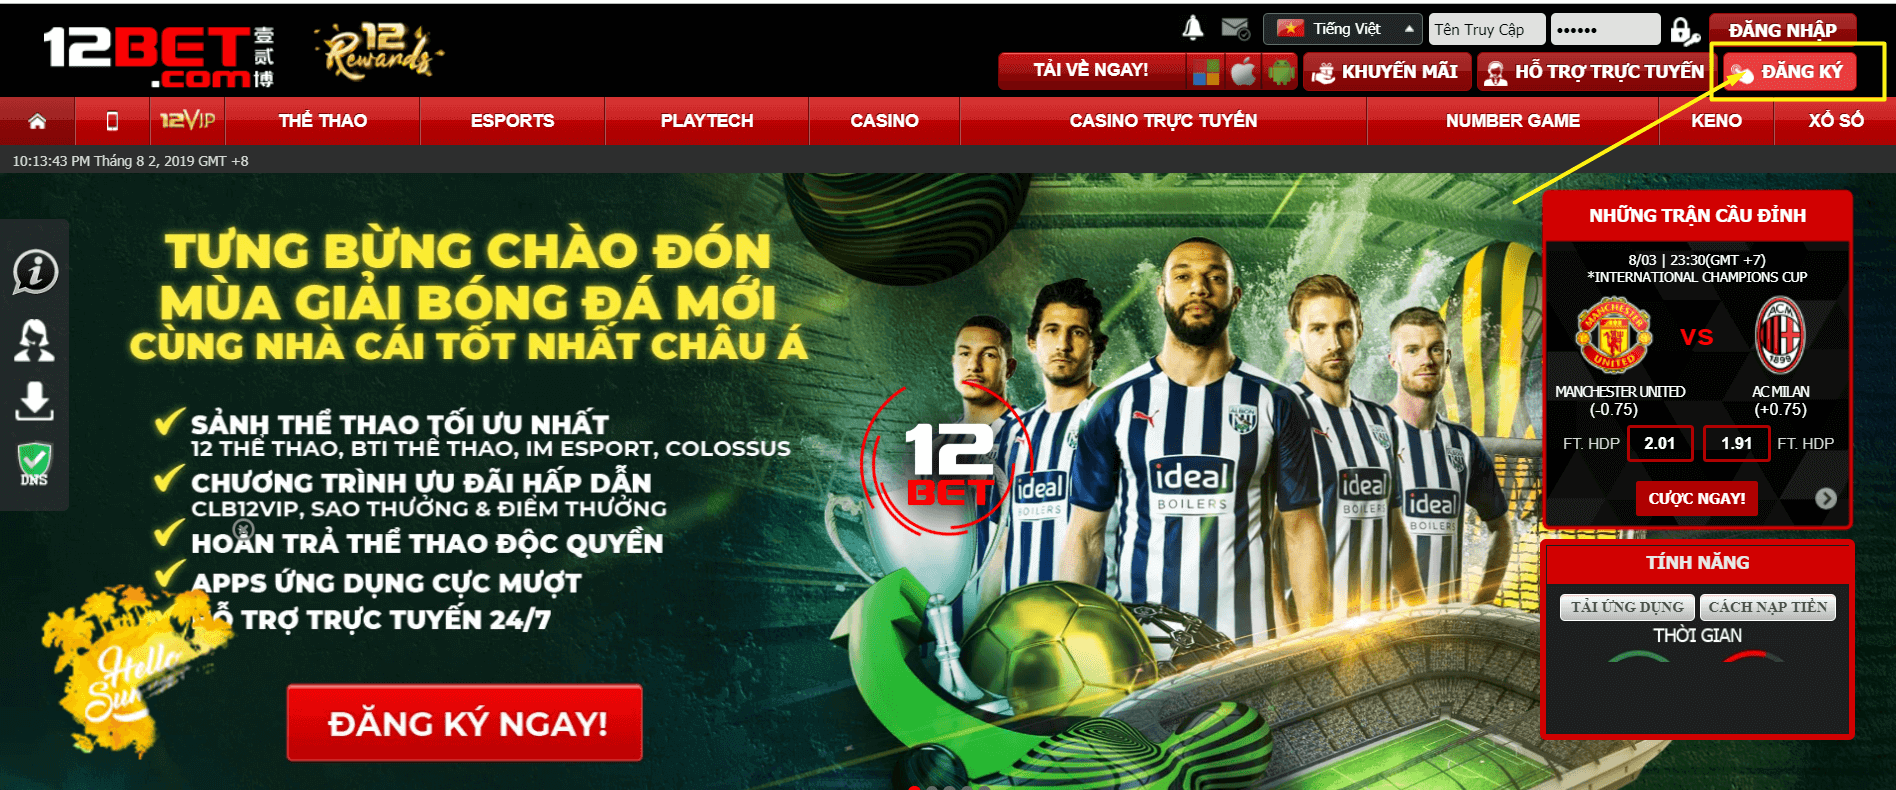 giao diện 12bet